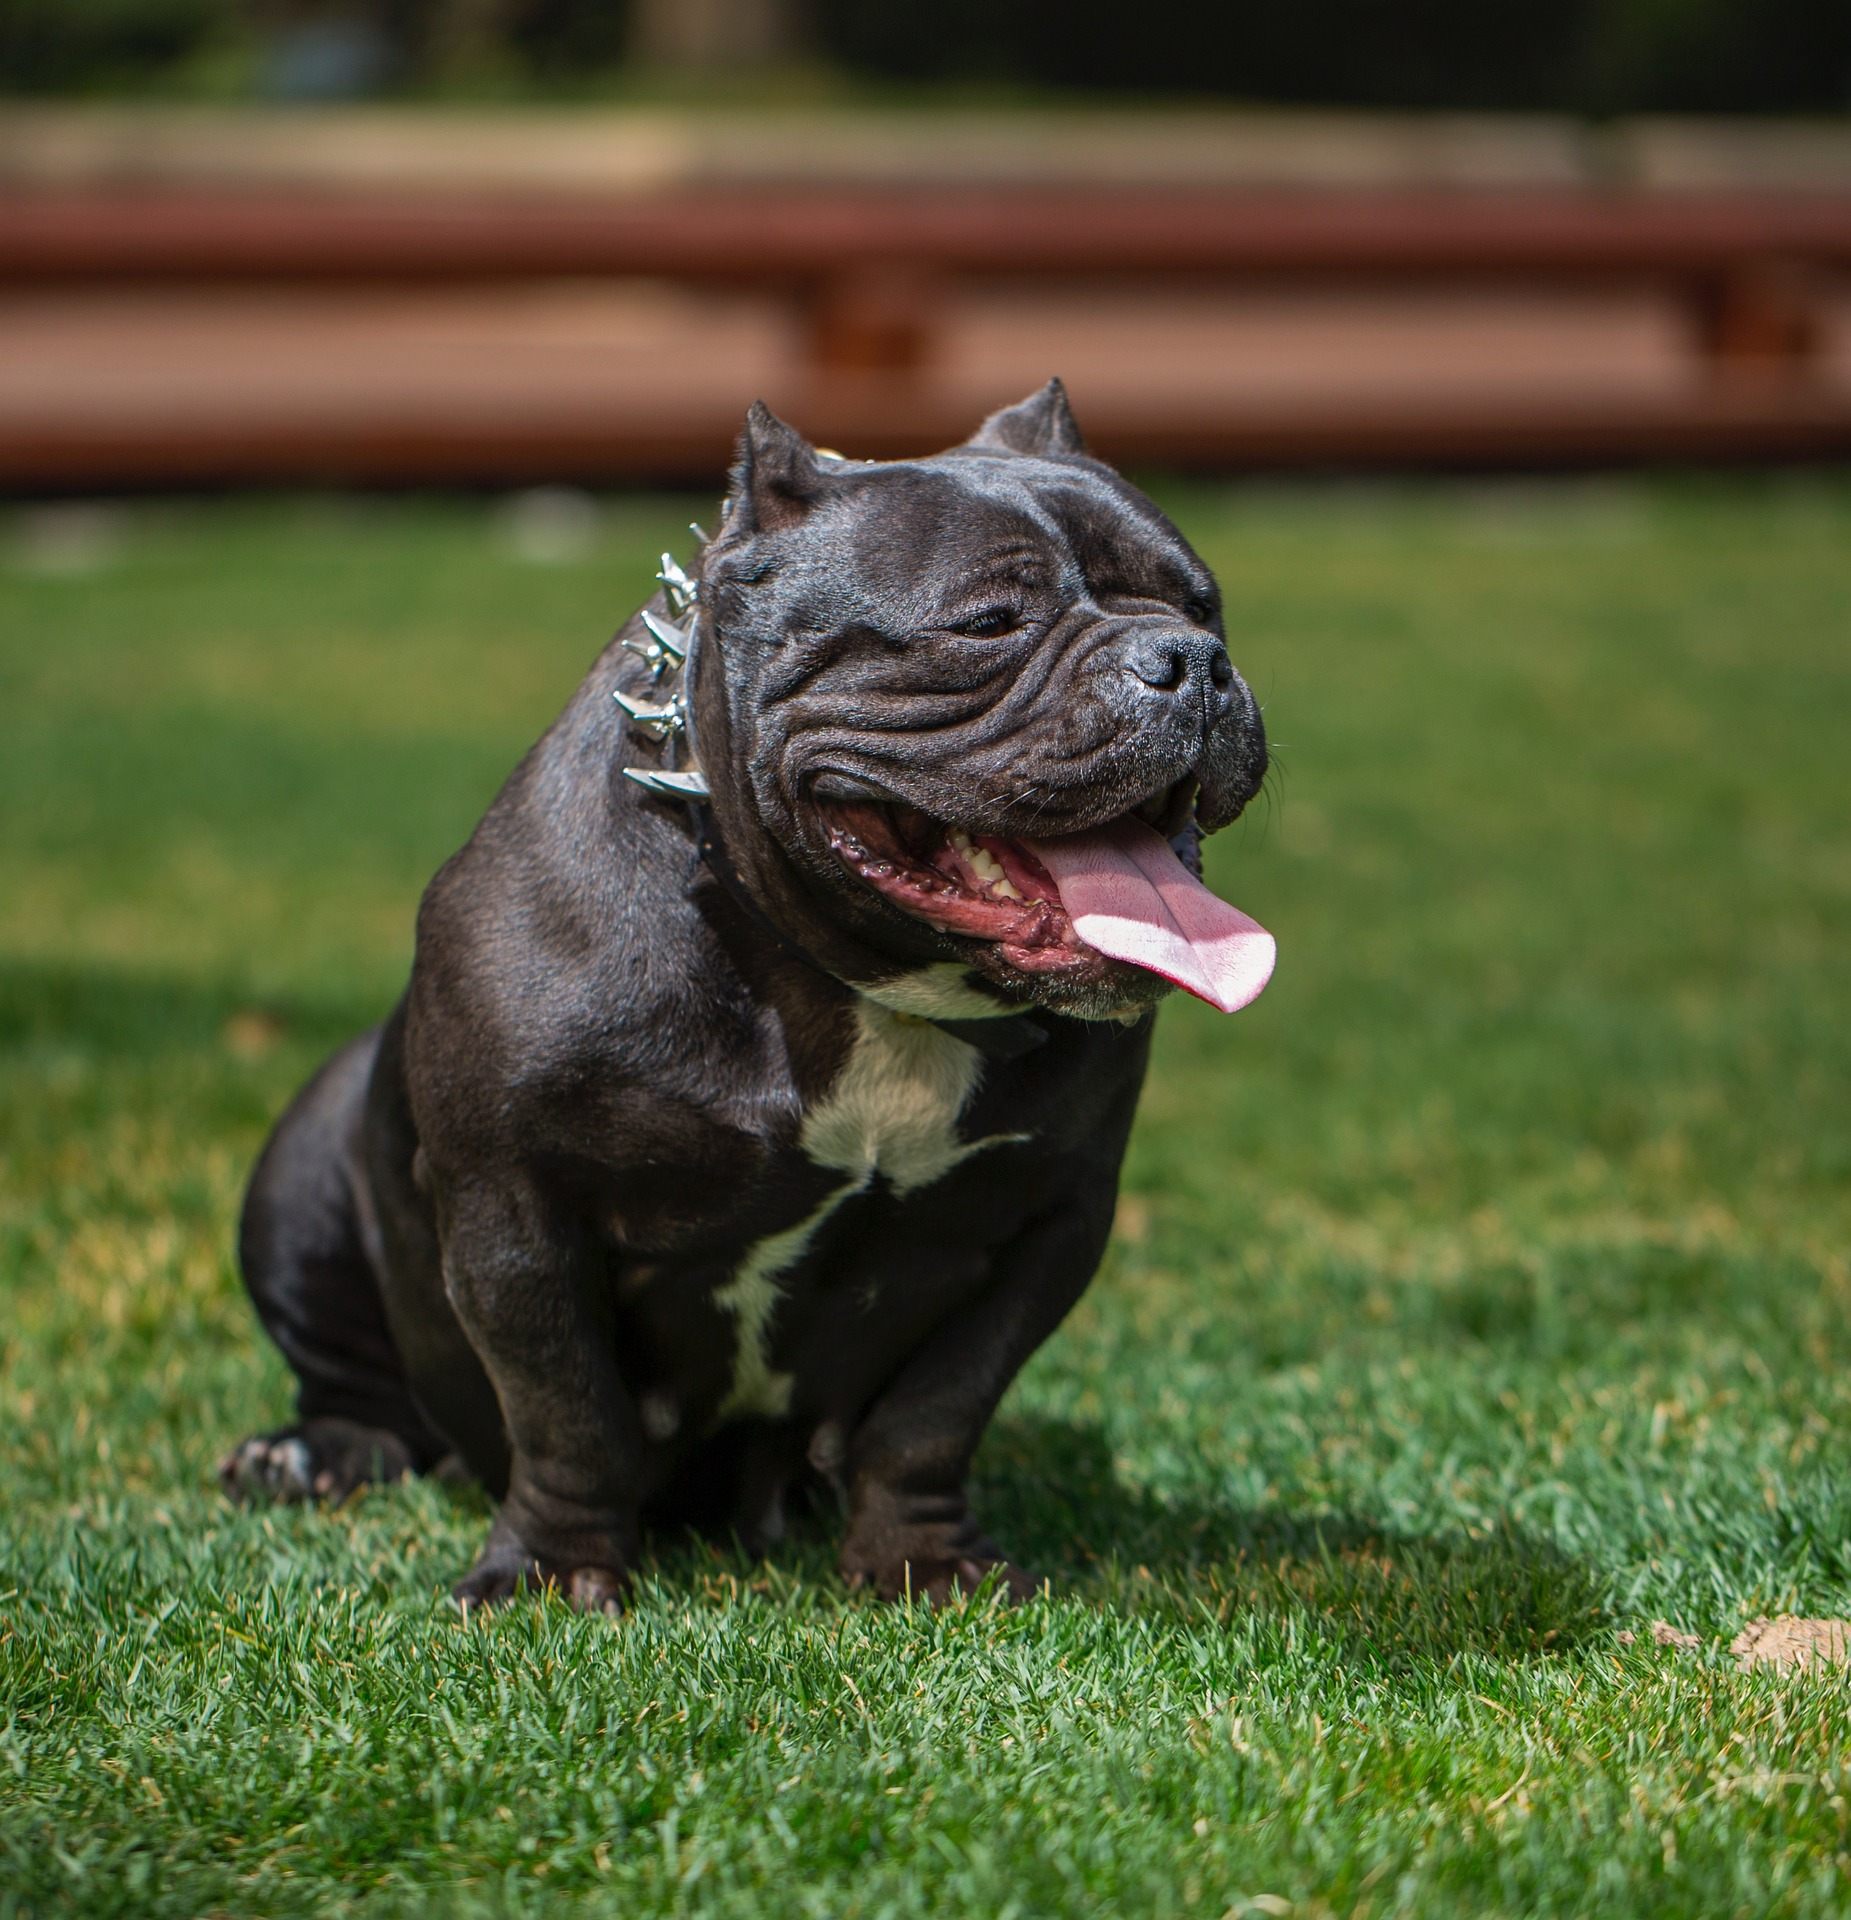 Ownership of unlicensed XL Bully dogs to be illegal